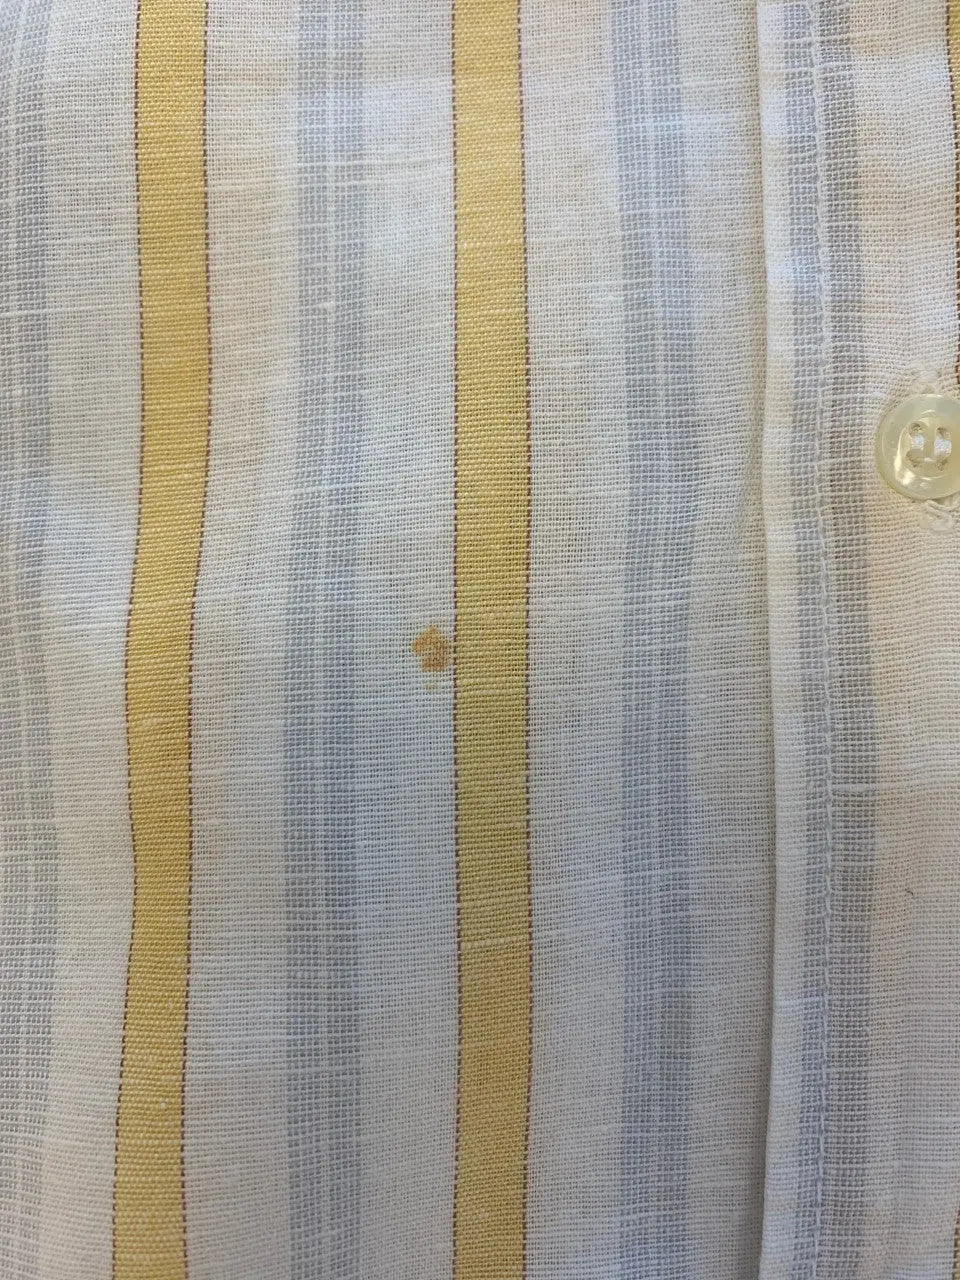 Agatex - 70s Striped Shirt- ThriftTale.com - Vintage and second handclothing